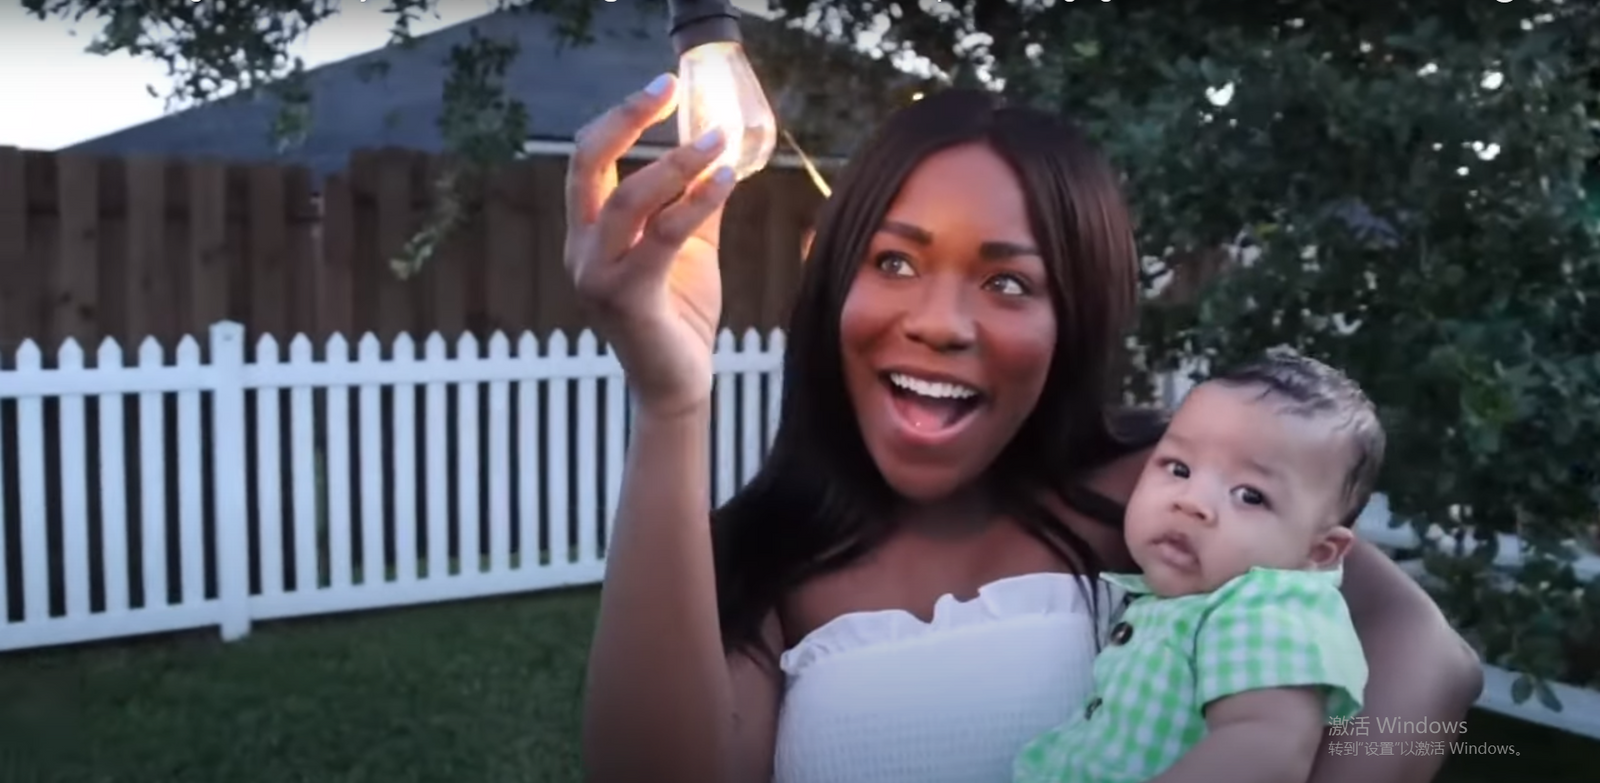  Heartwarming Mother's Day /Outdoor Patio String Lights